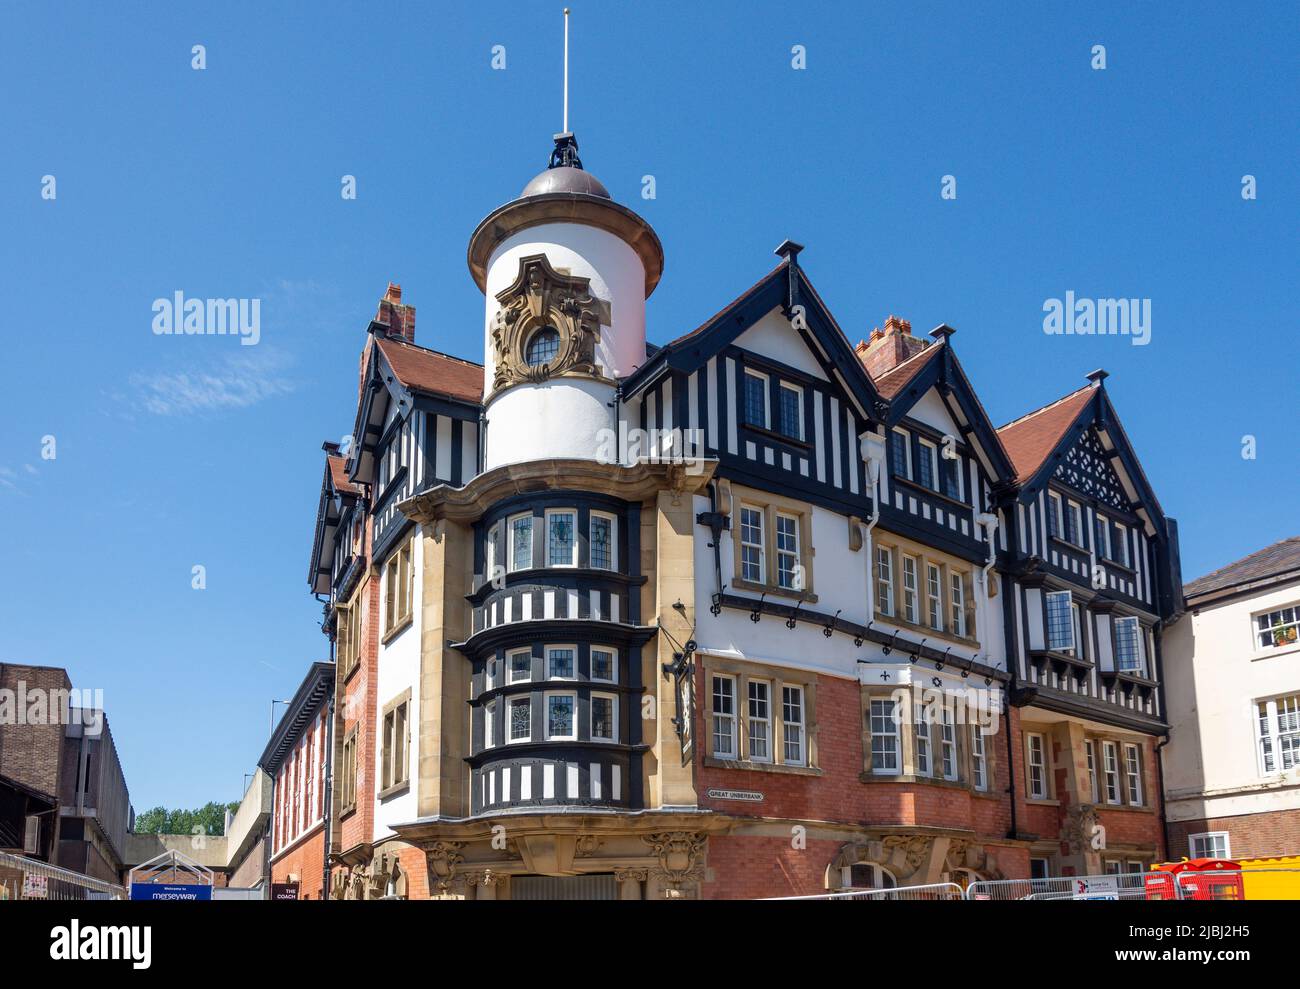 15th Century The White Hotel, Great Underbank, Stockport, Greater Manchester, Inghilterra, Regno Unito Foto Stock